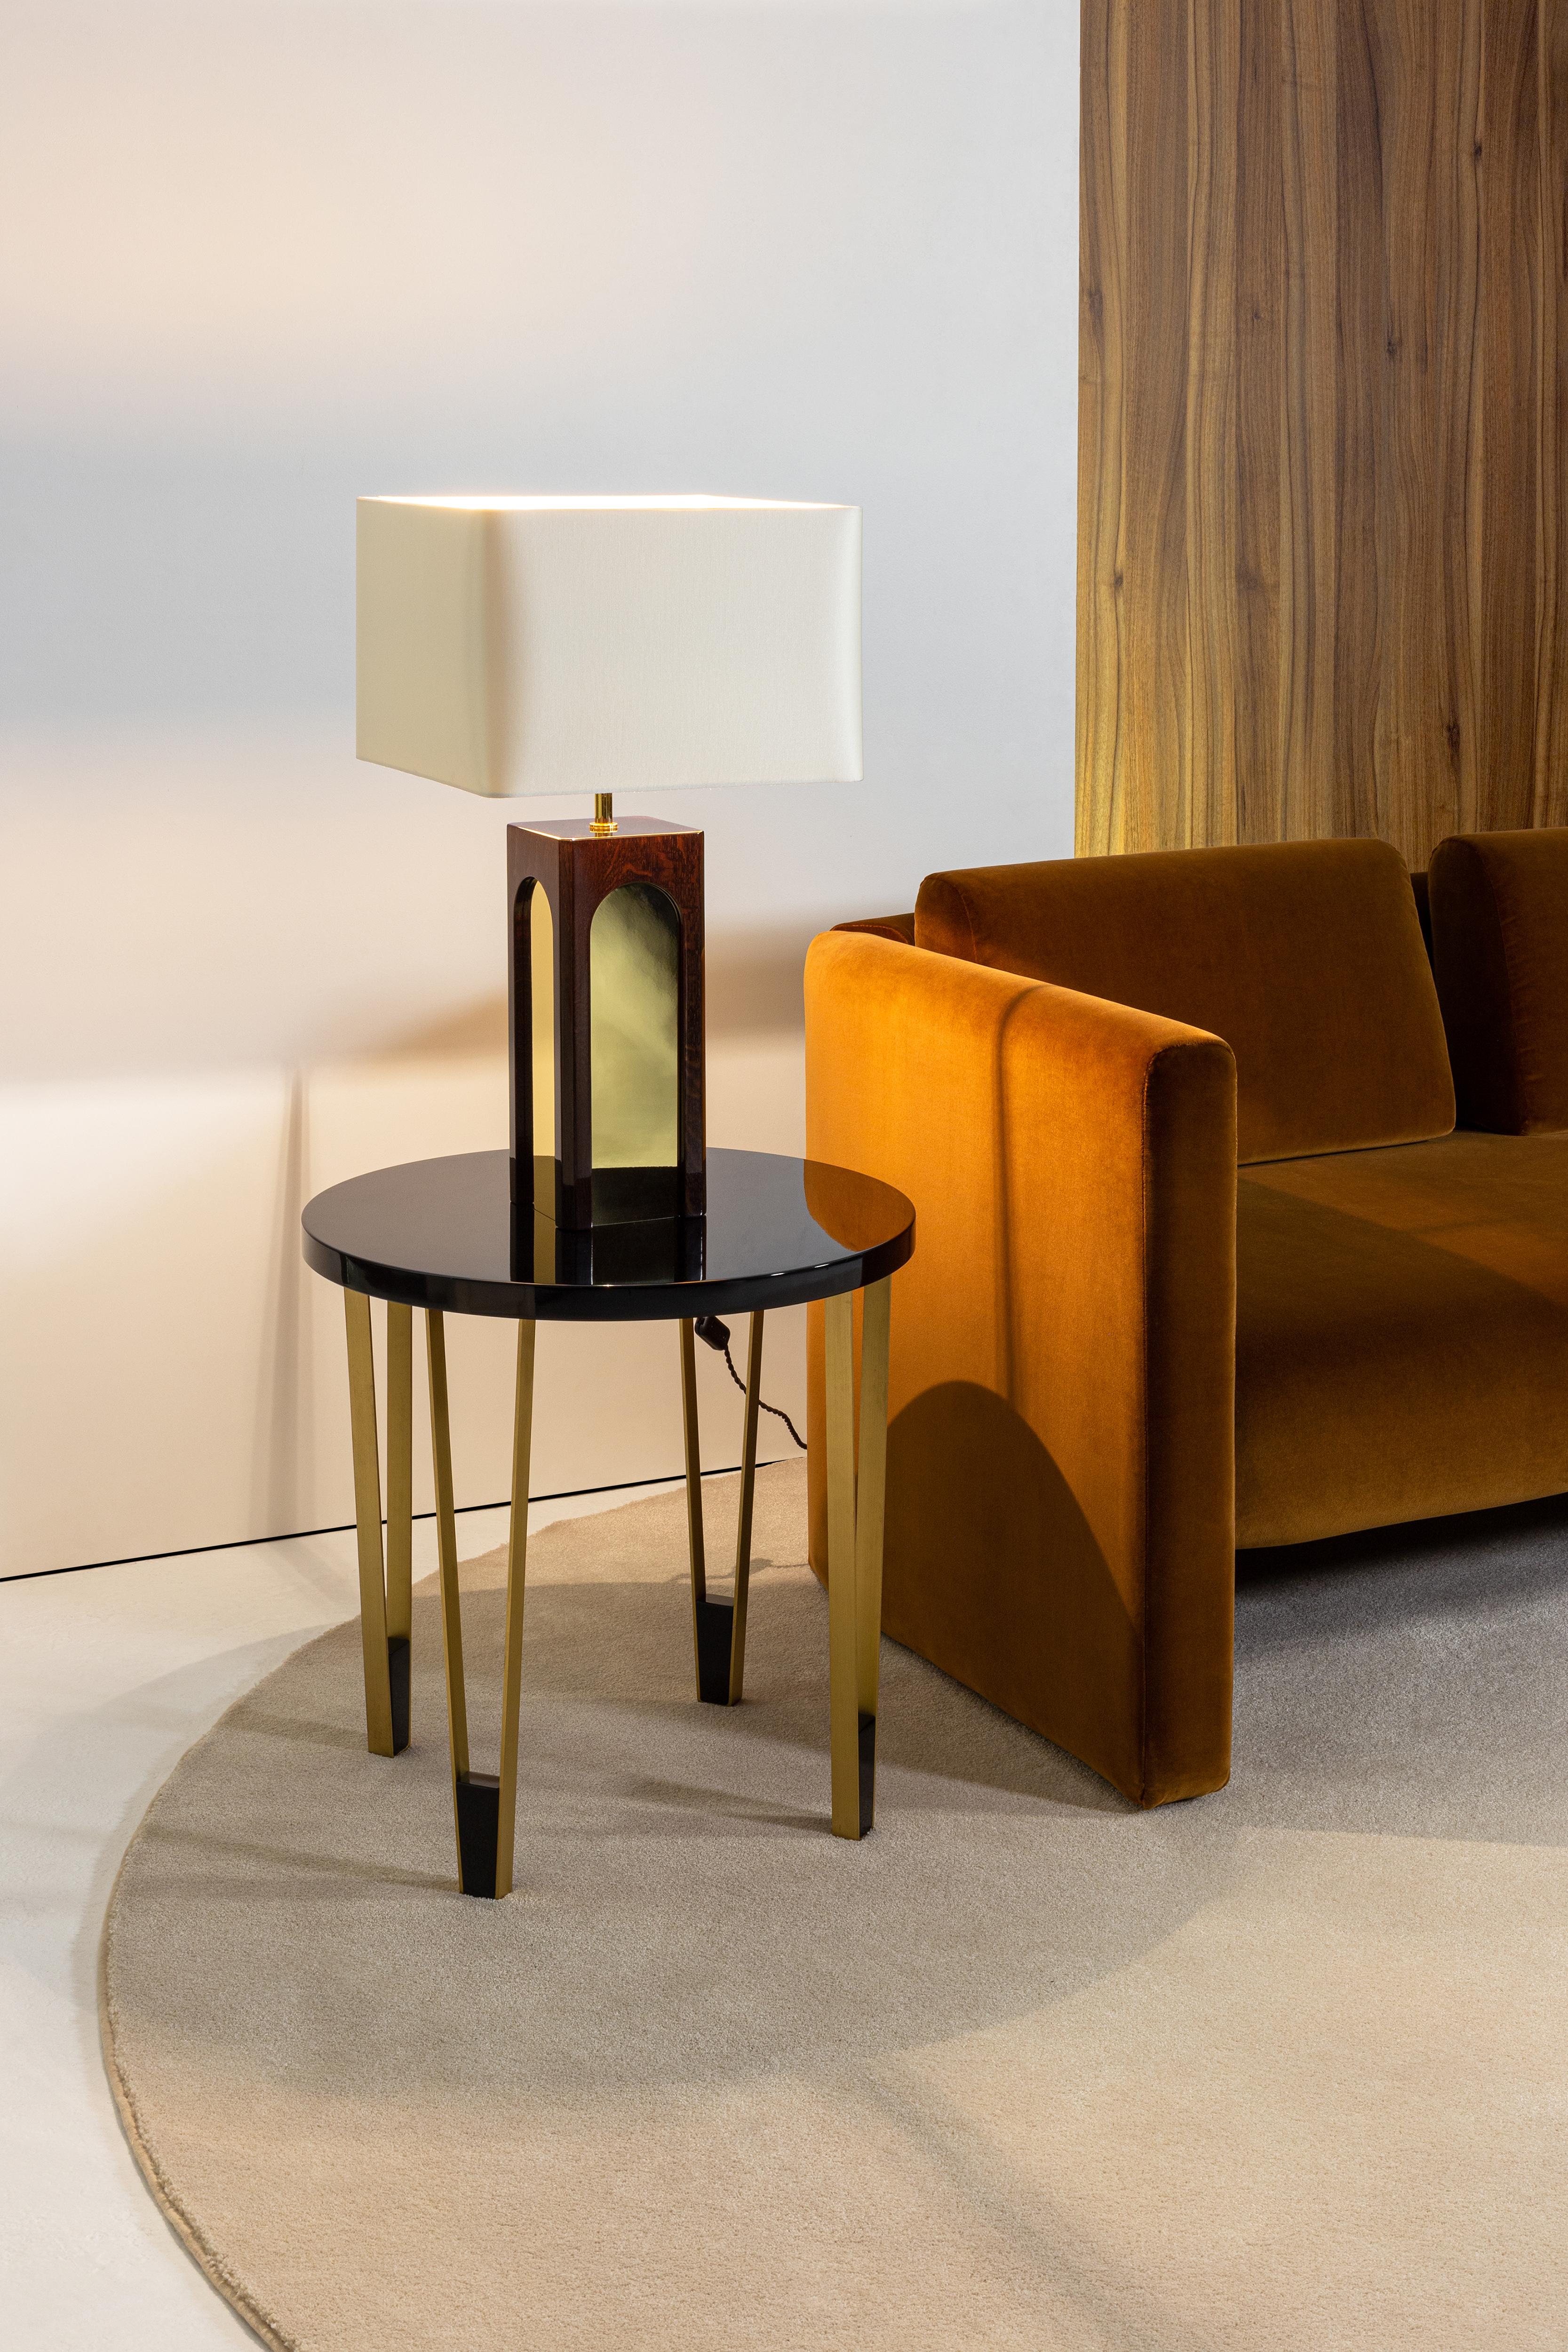 Lacquered Metropolitan Table Lamp, Wood and Brass, InsidherLand by Joana Santos Barbosa For Sale